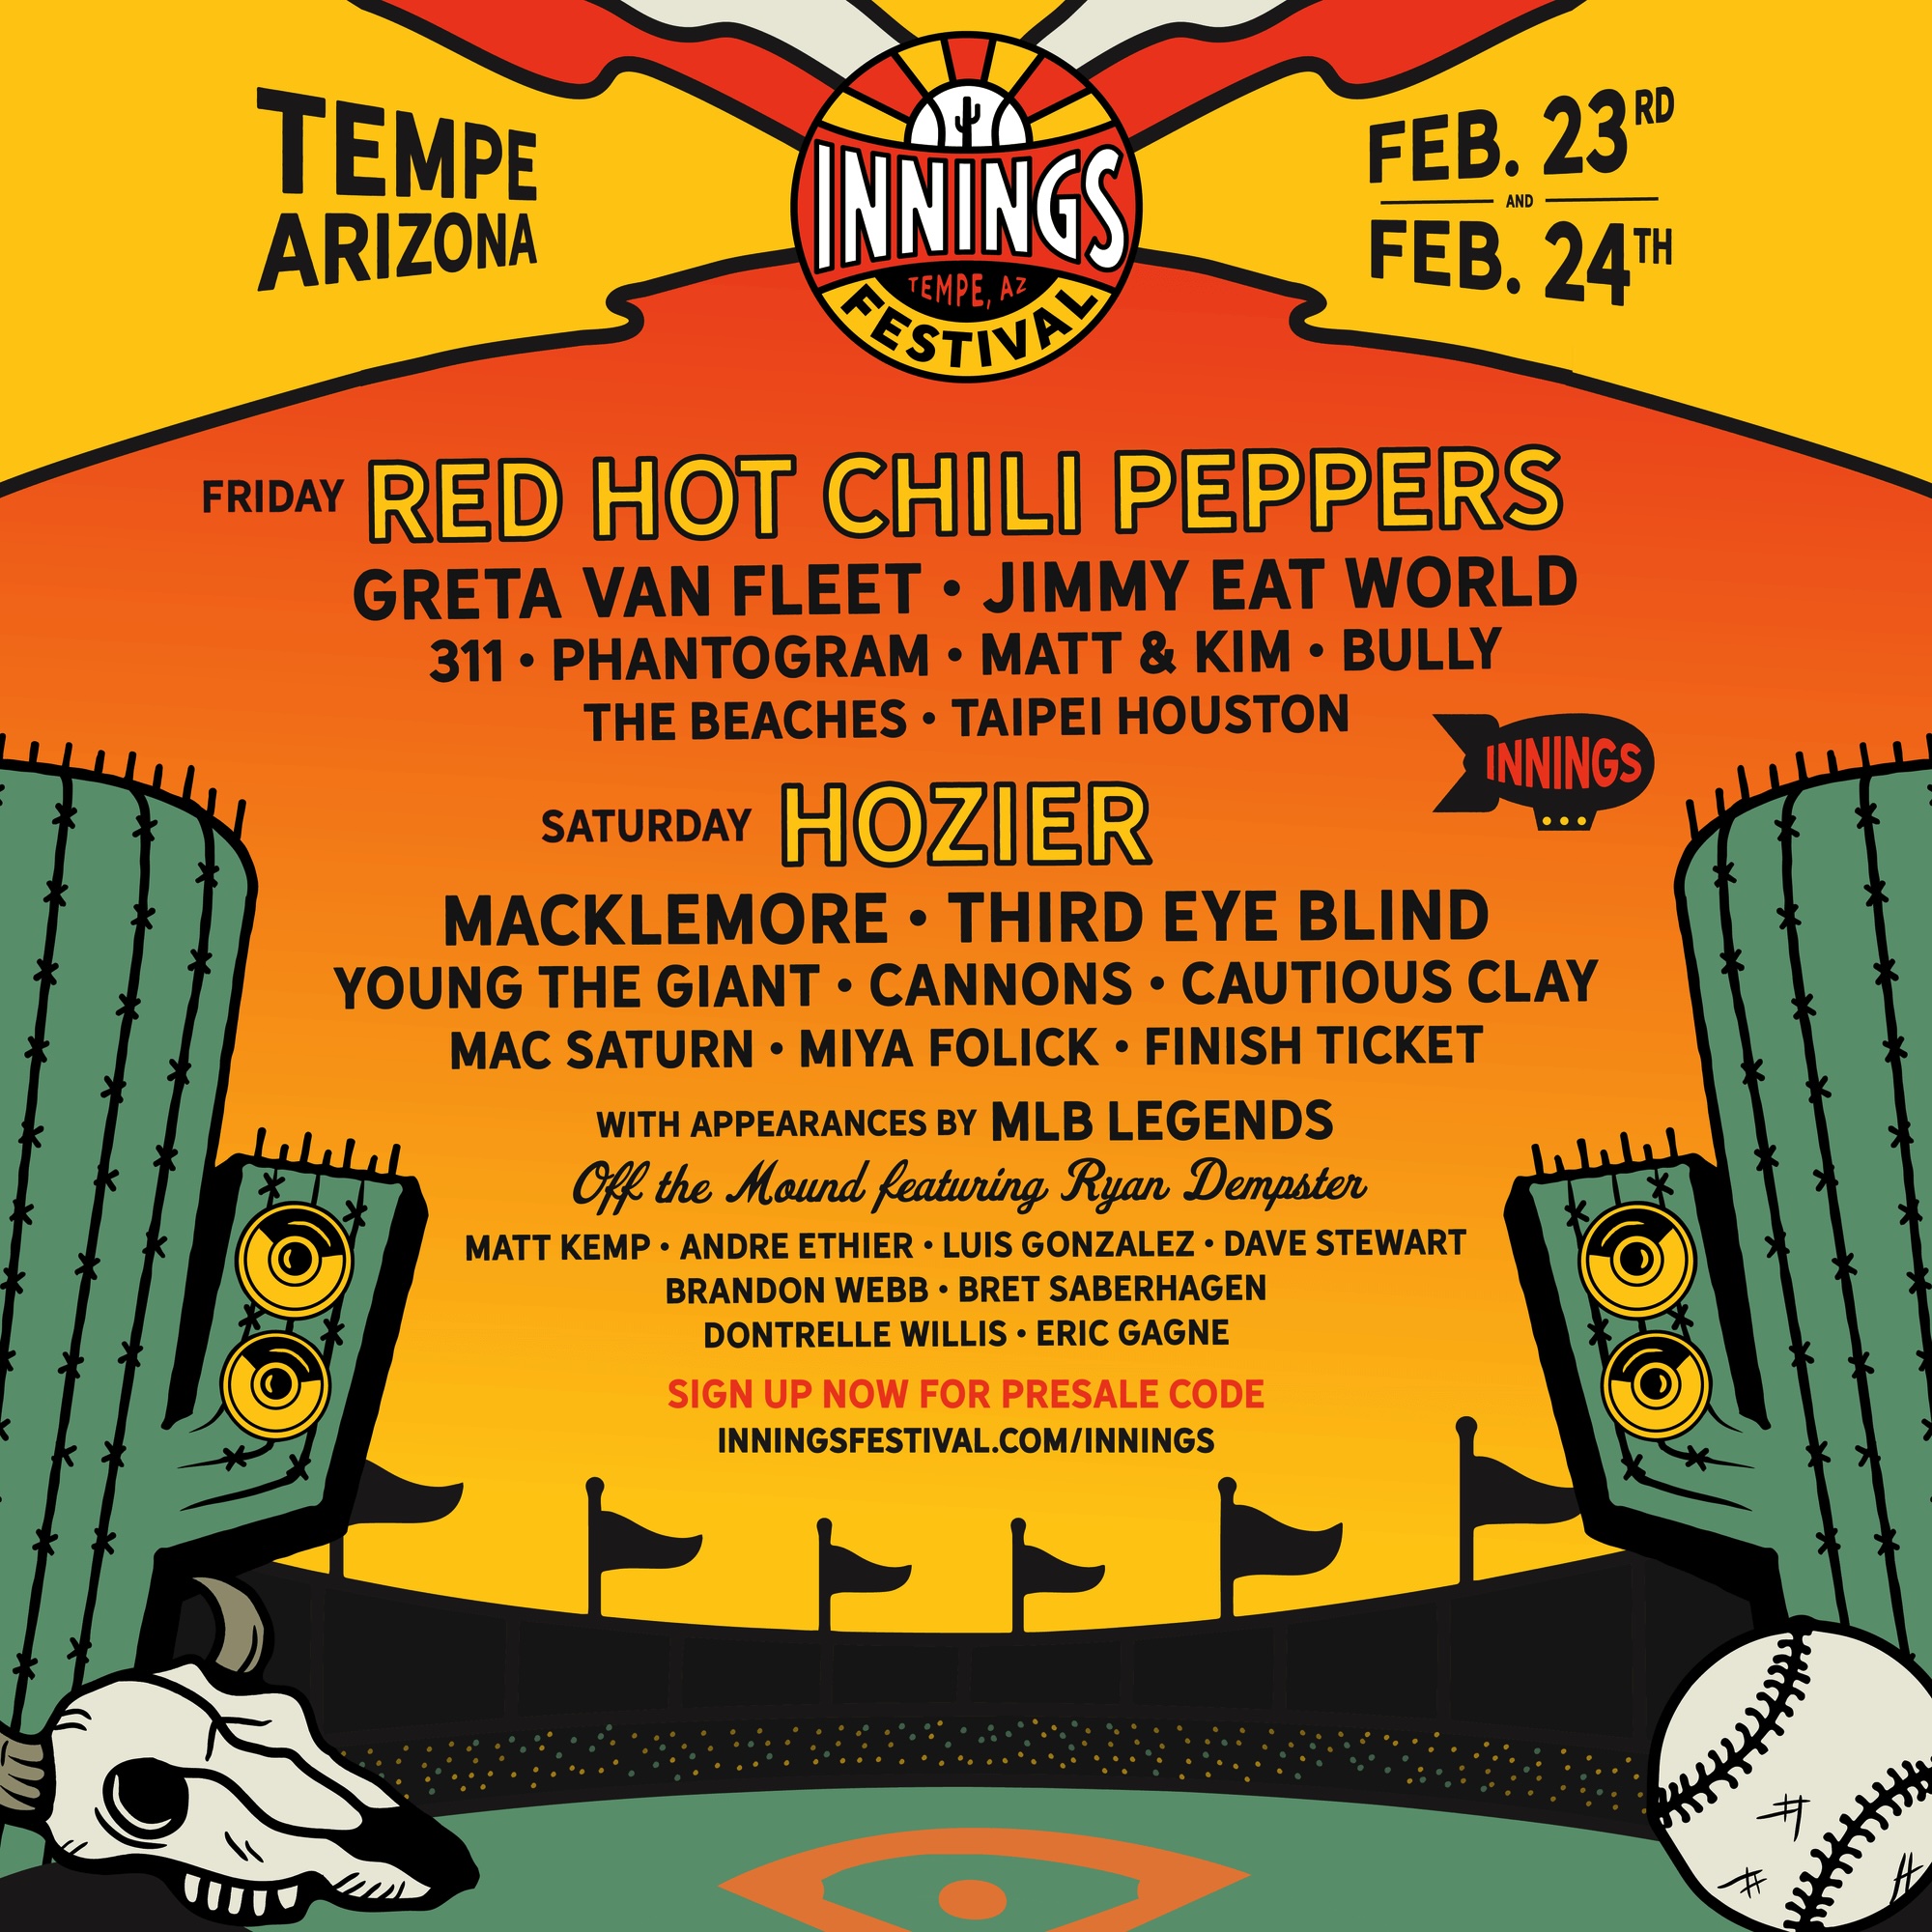 Innings Festival Tempe lineup poster